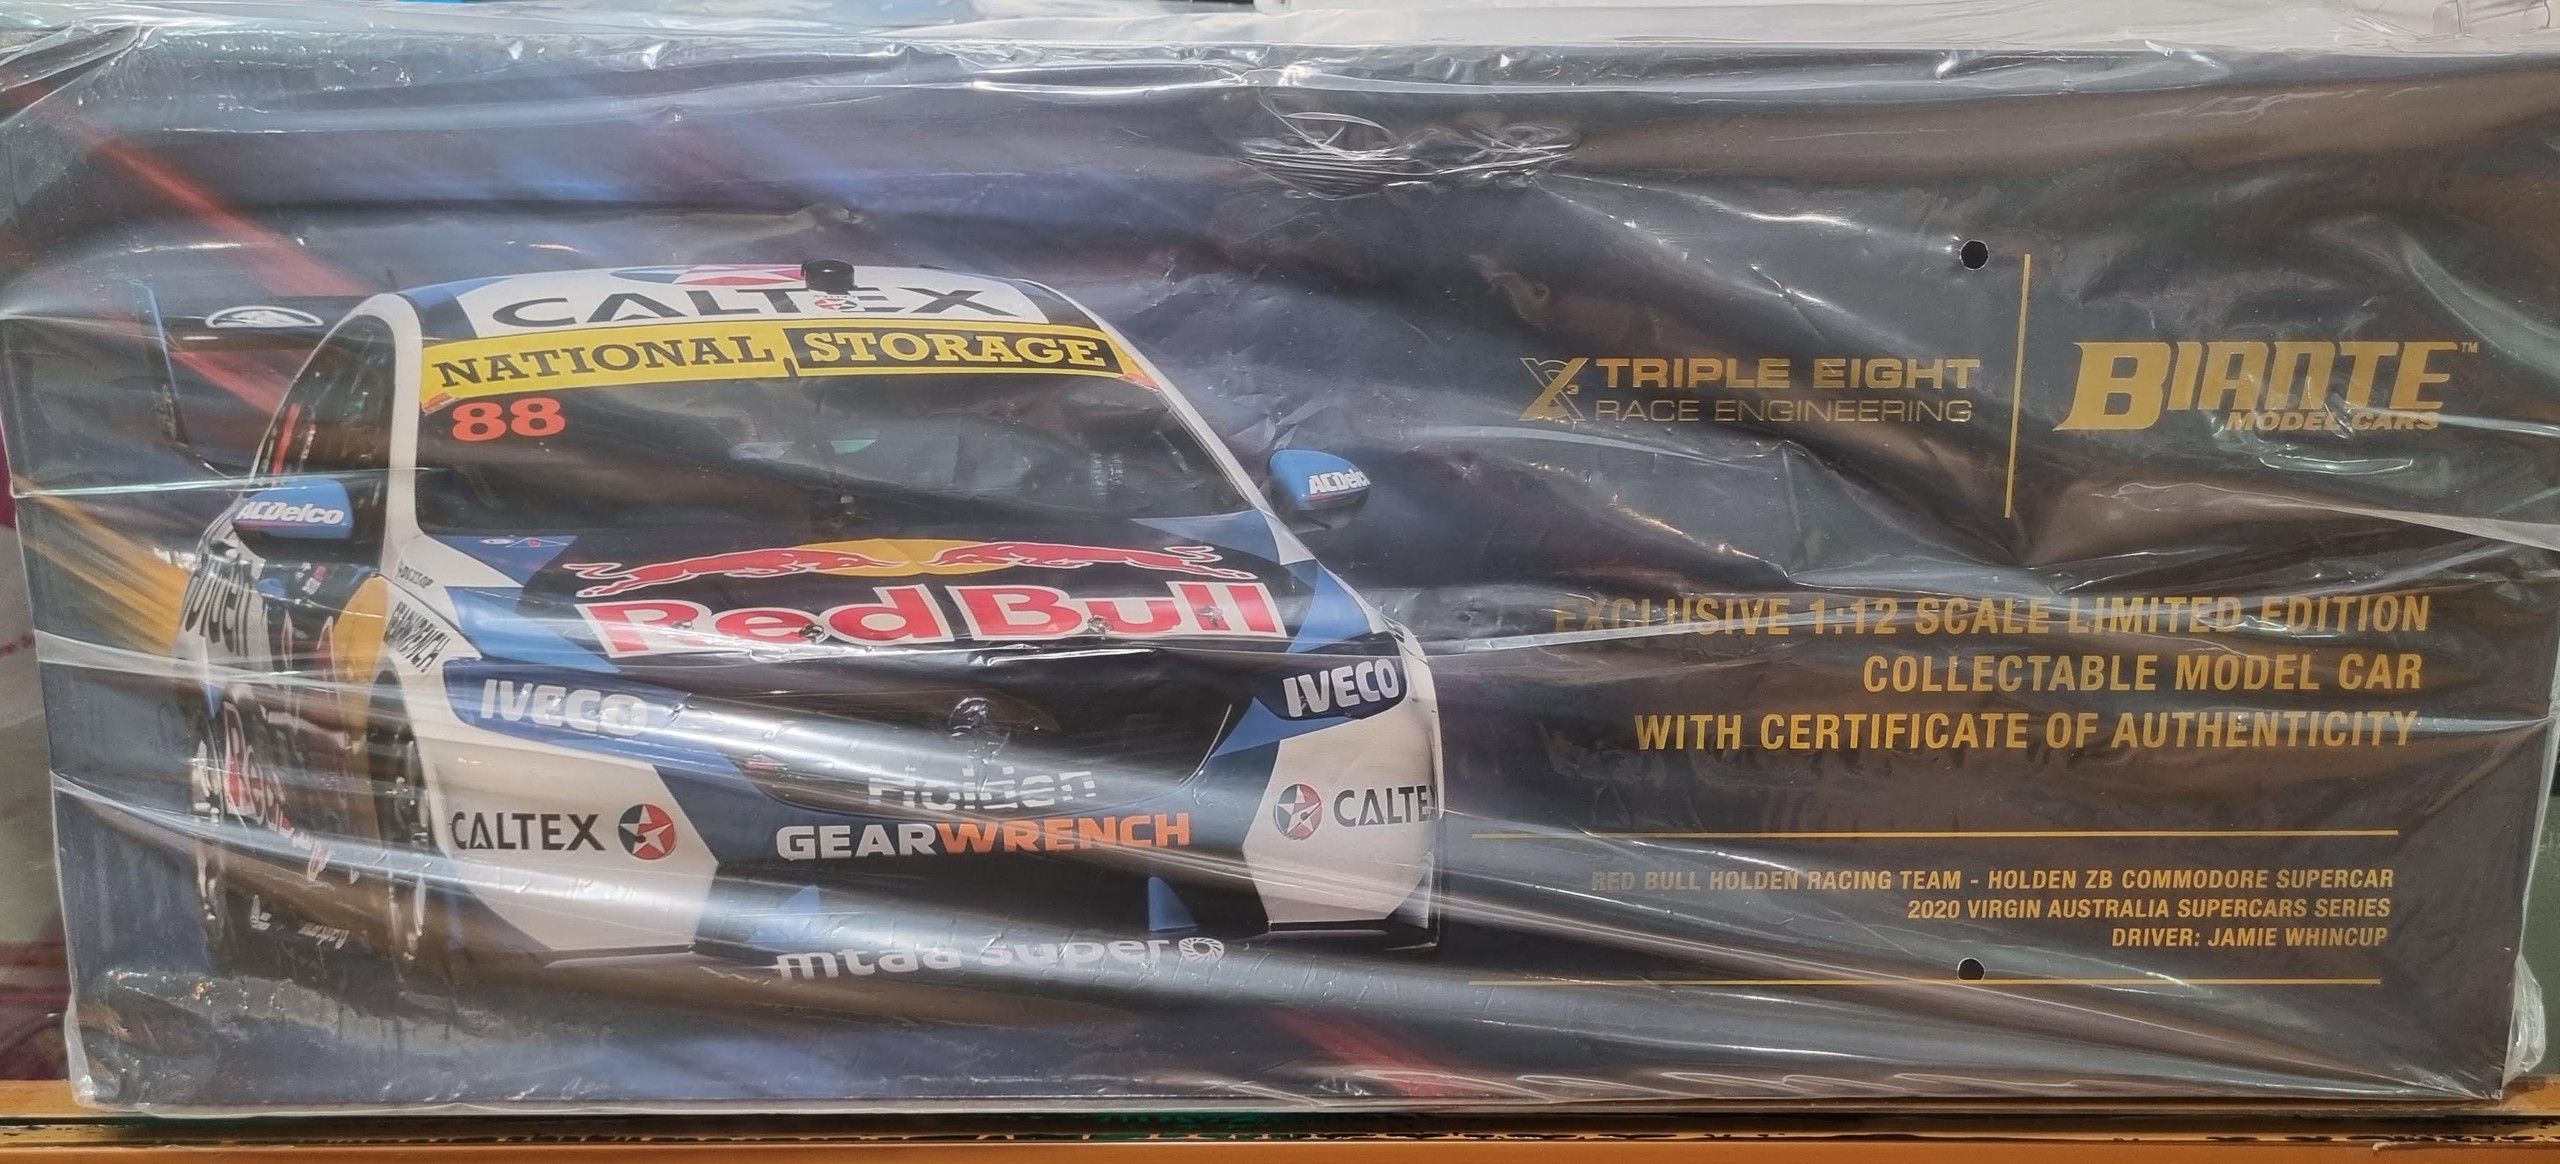 Holden Commodore ZB V8 Supercar 2020 Jamie Whincup 888 Red Bull Racing 1/12 Biante